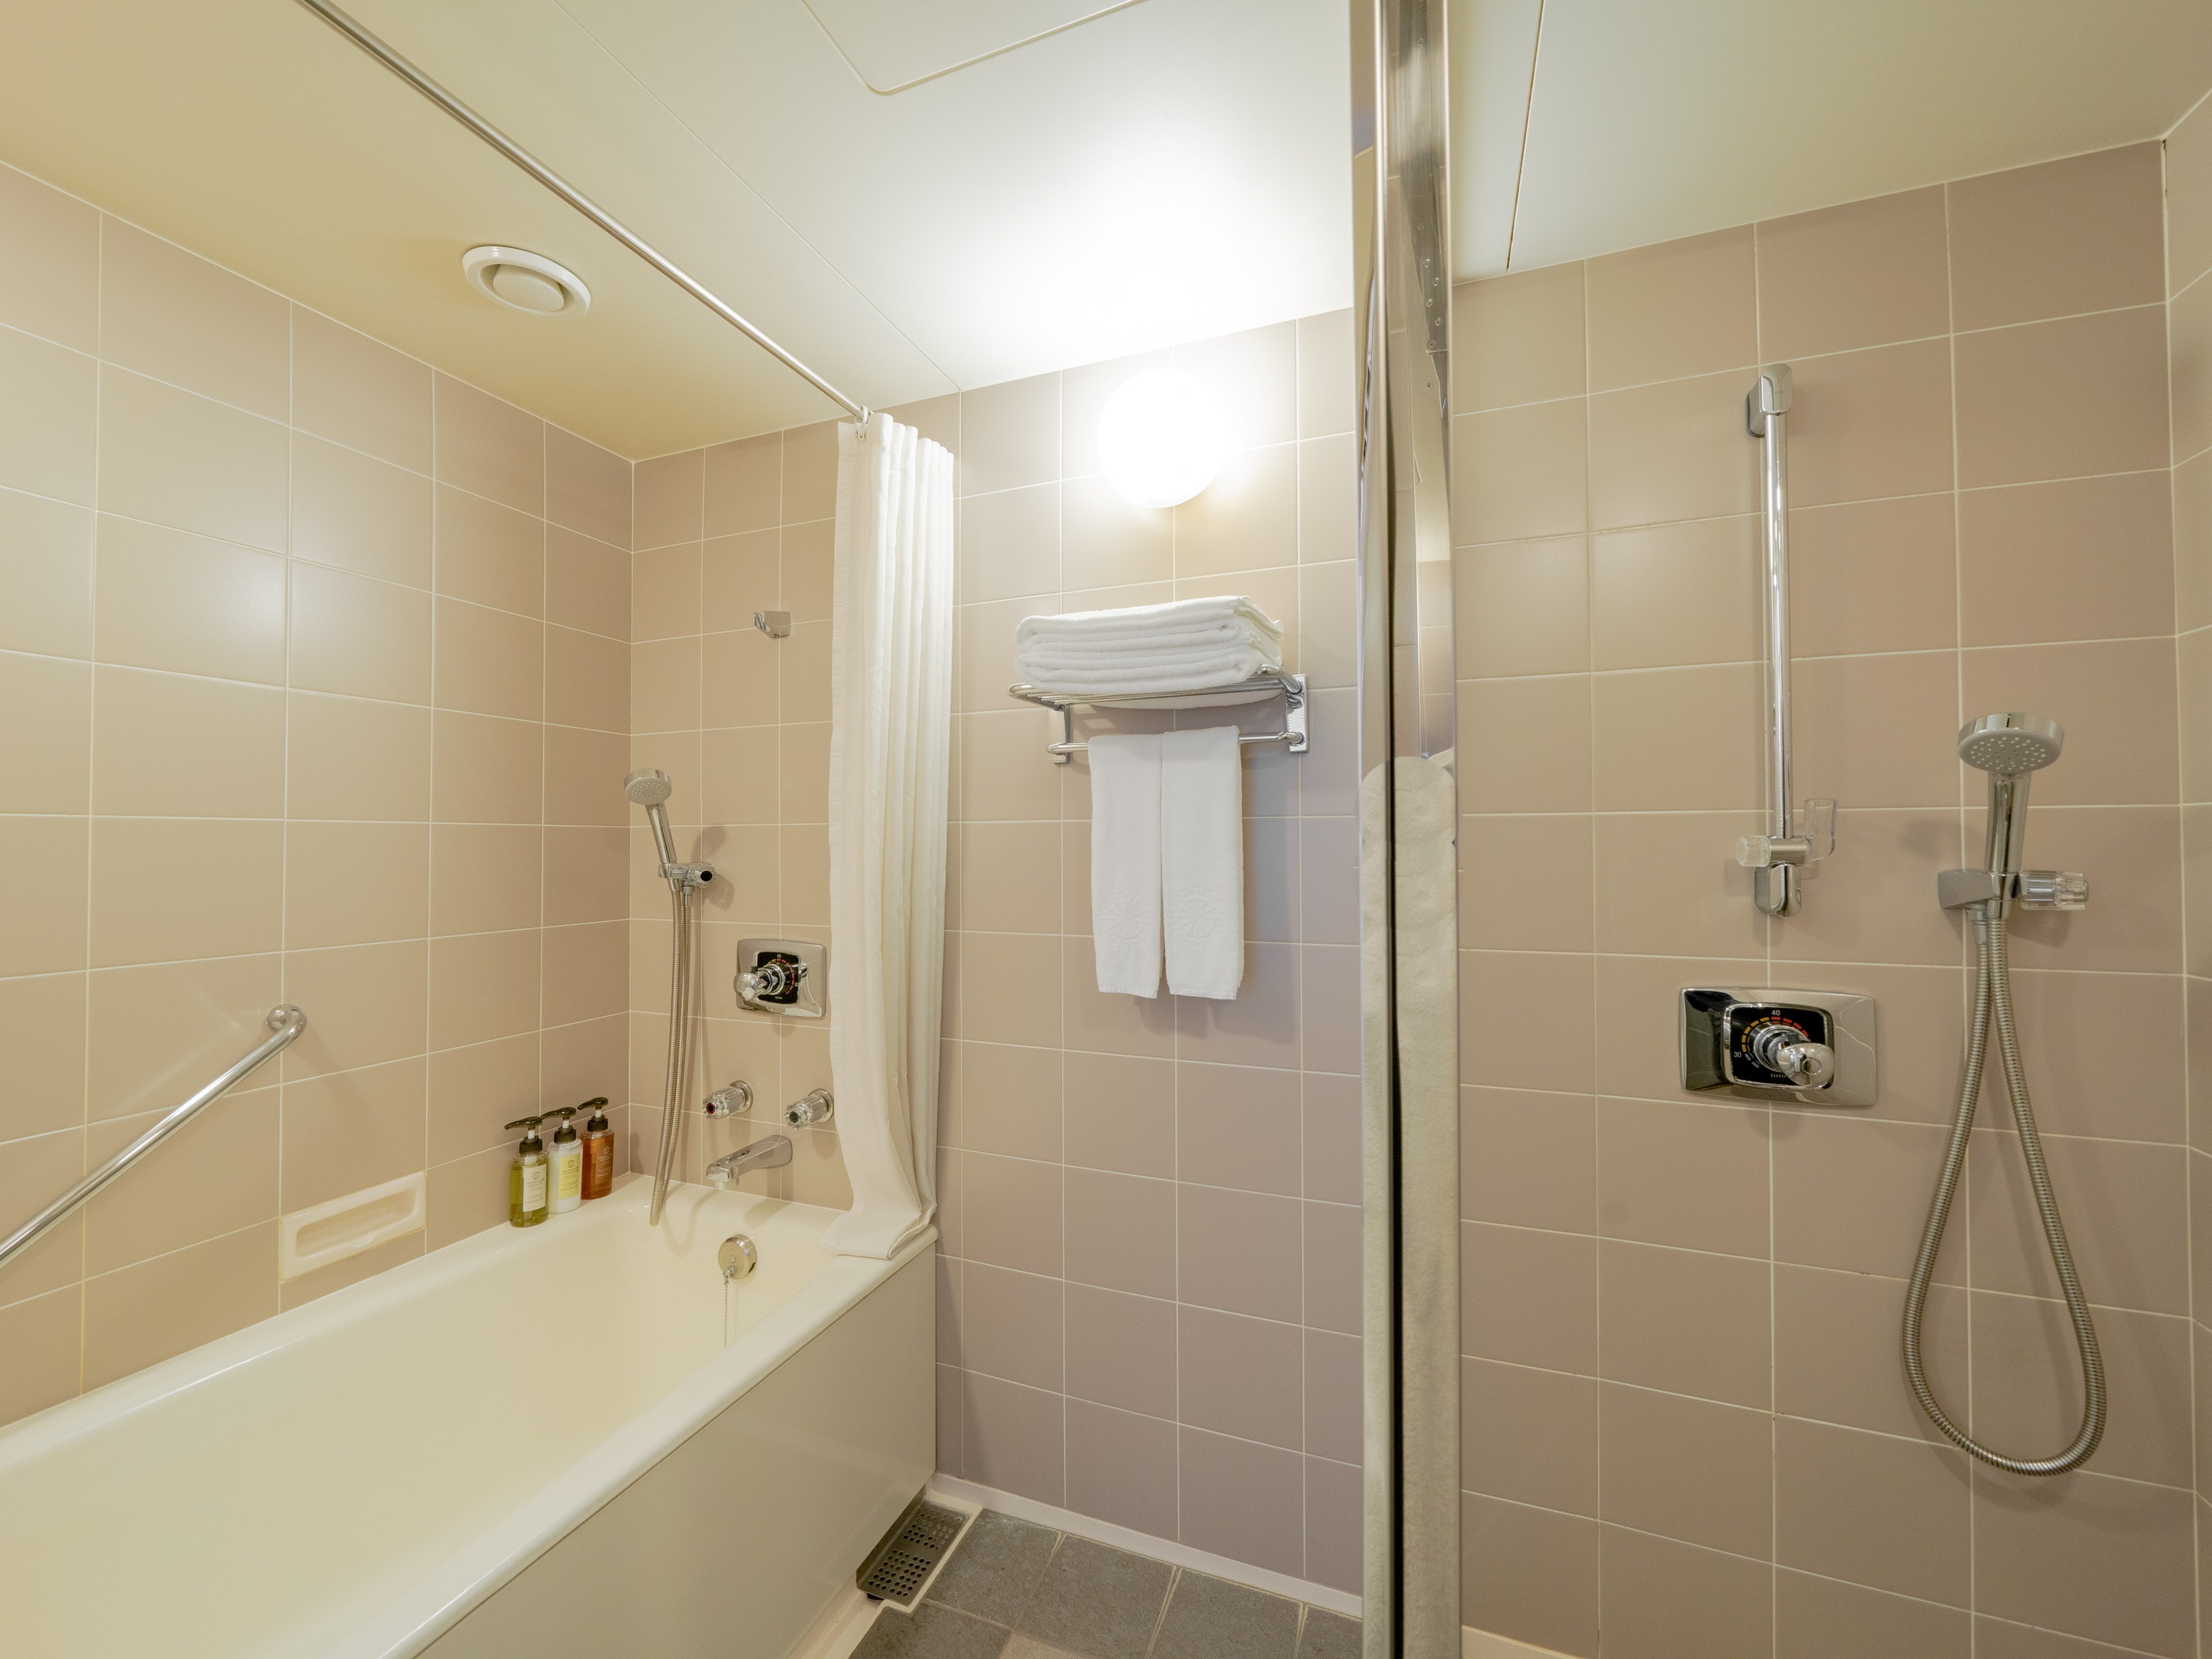 Bathroom with shower booth for both comfort and functionality